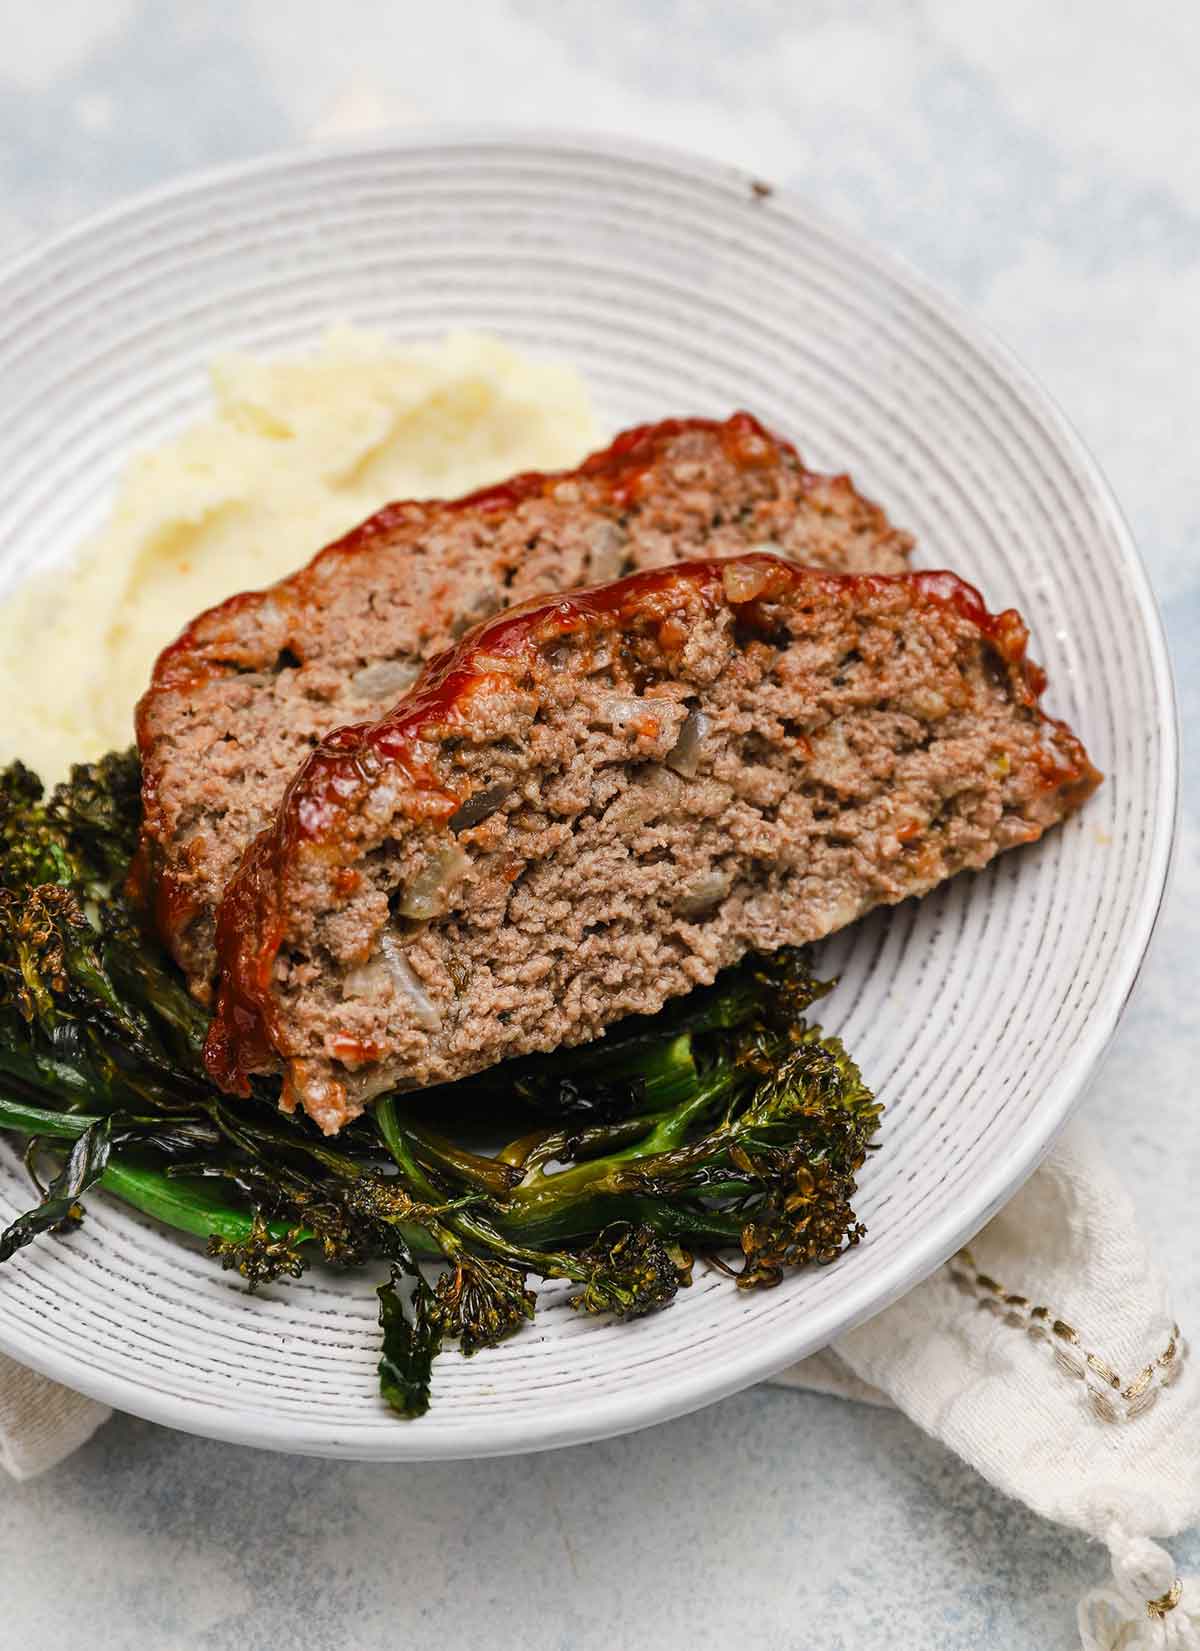 Grandma's Meatloaf With Oats: A Classic Recipe for Perfect Texture and Flavor